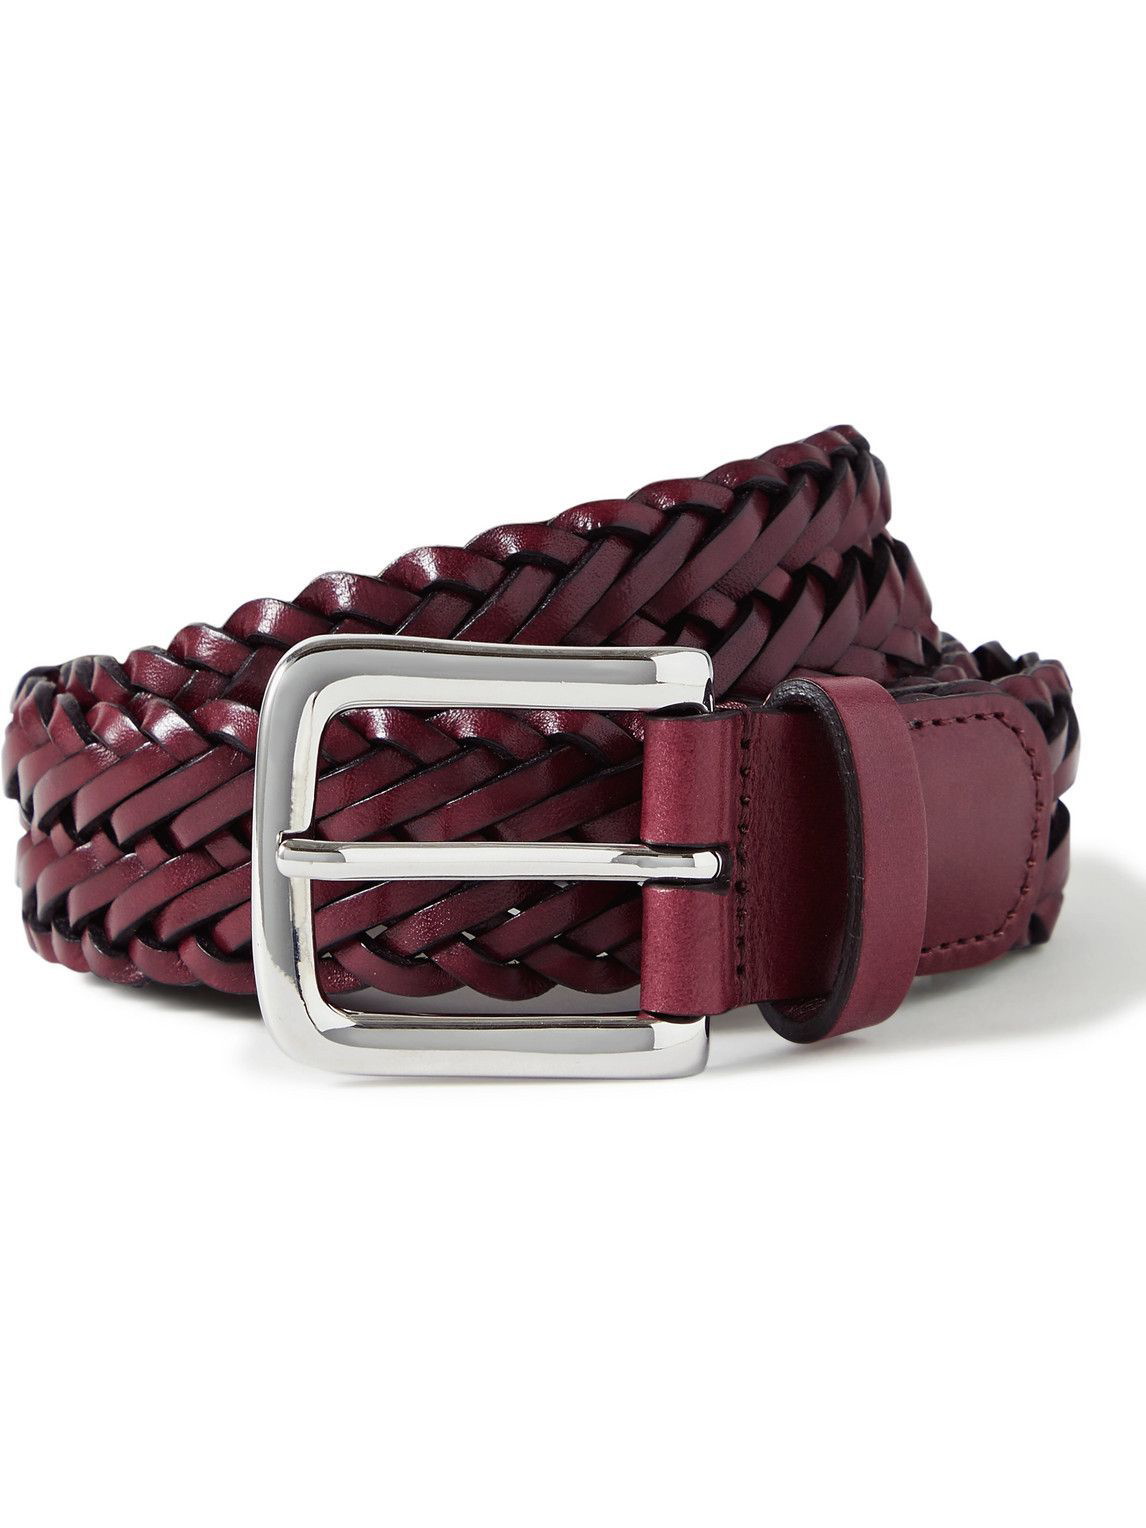 Anderson's - 3cm Woven Leather Belt - Burgundy Anderson's